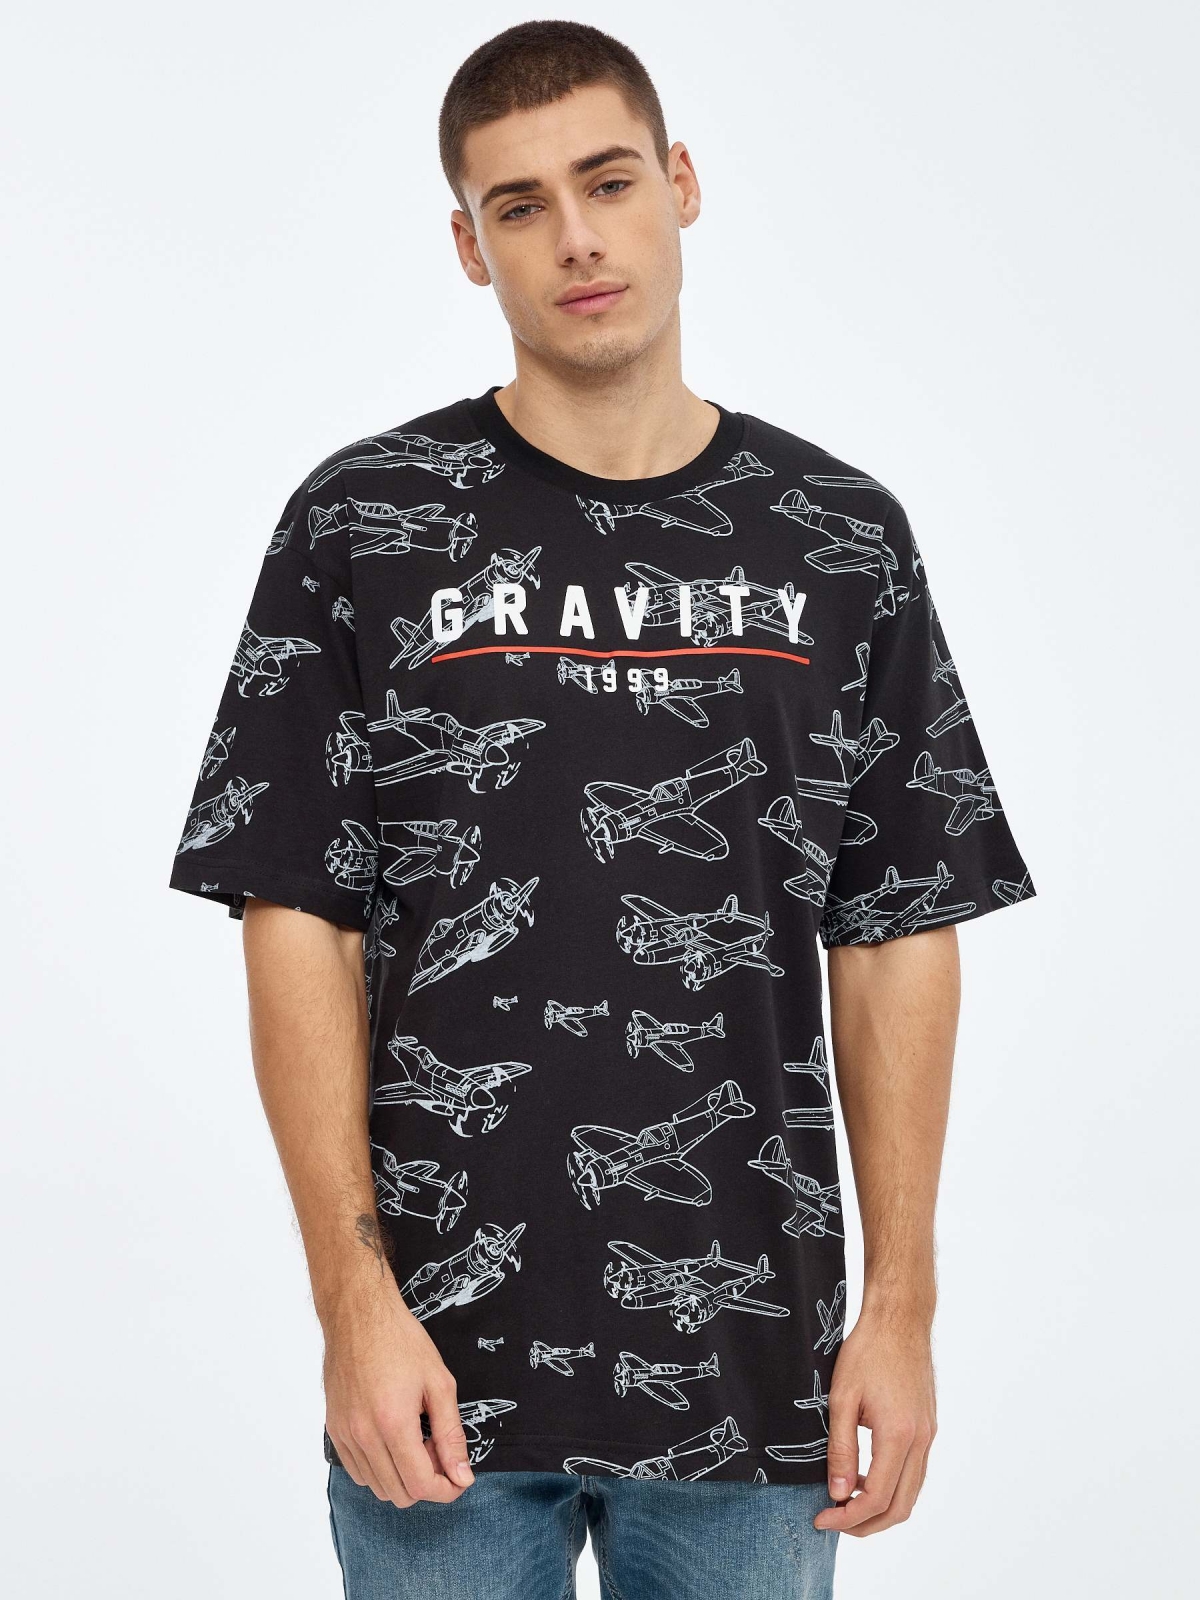 Aircraft printed t-shirt black middle front view